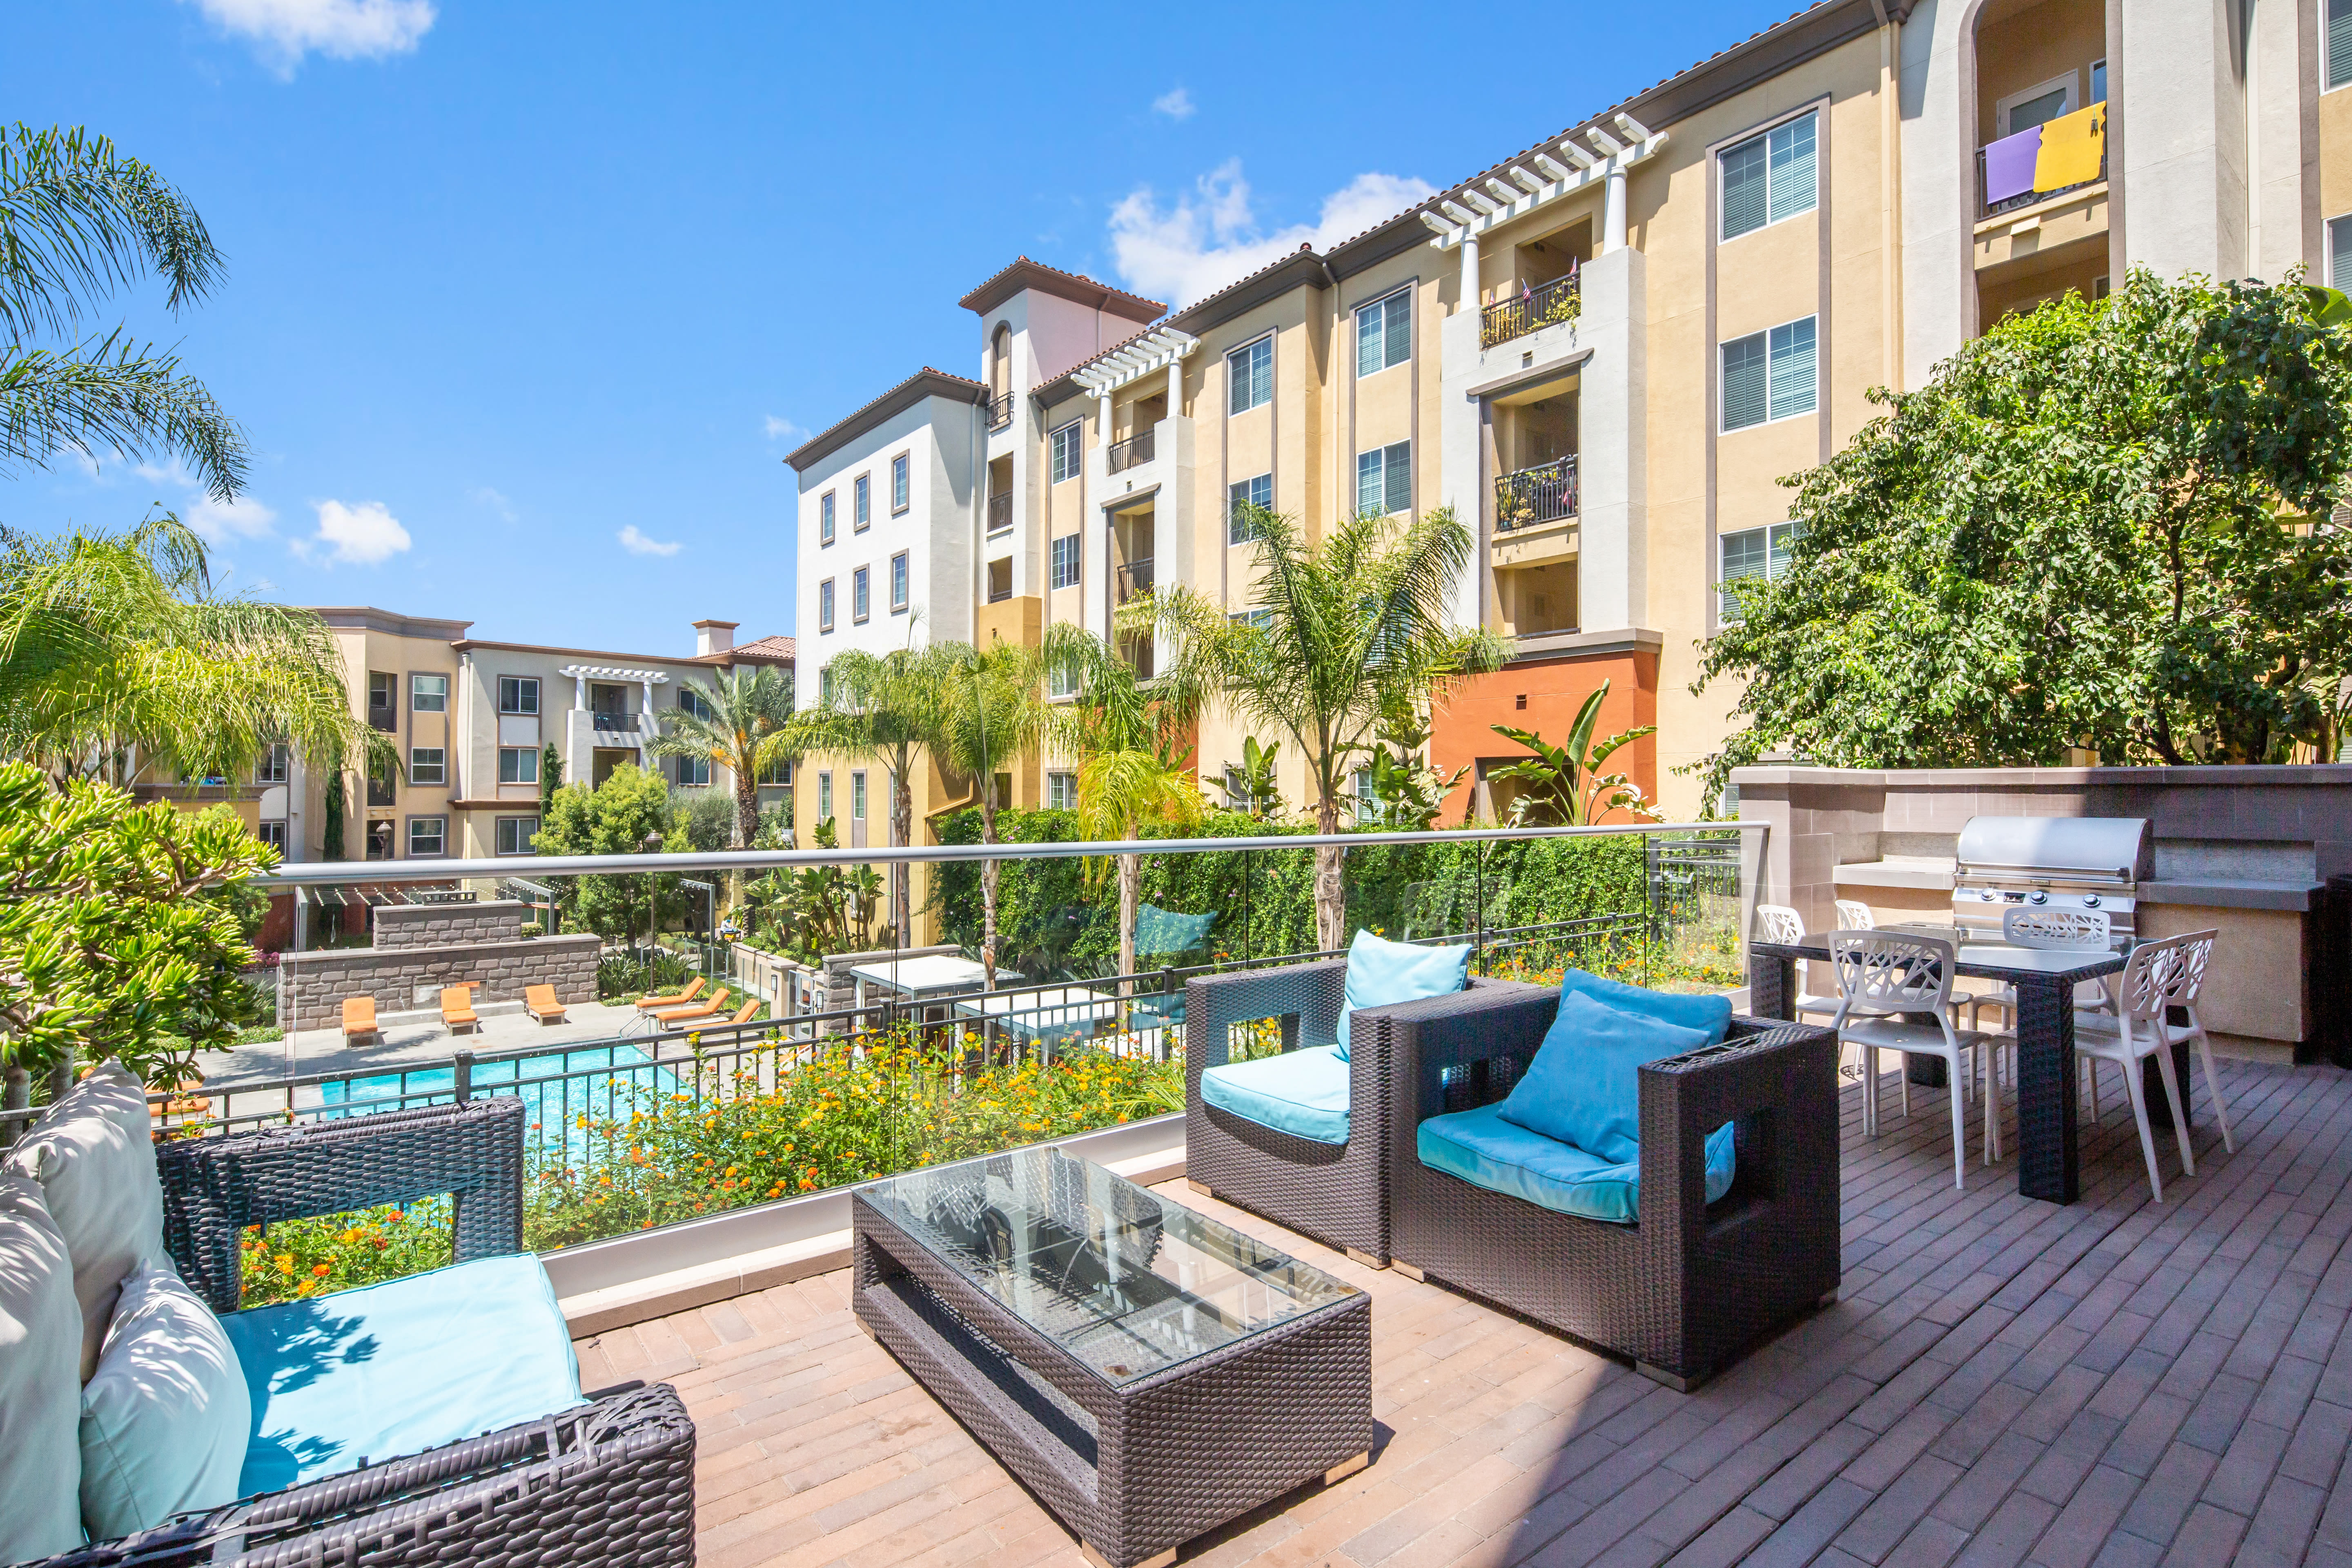 Balcony with comfortable seating at The Boulevard Apartment Homes in Woodland Hills, California